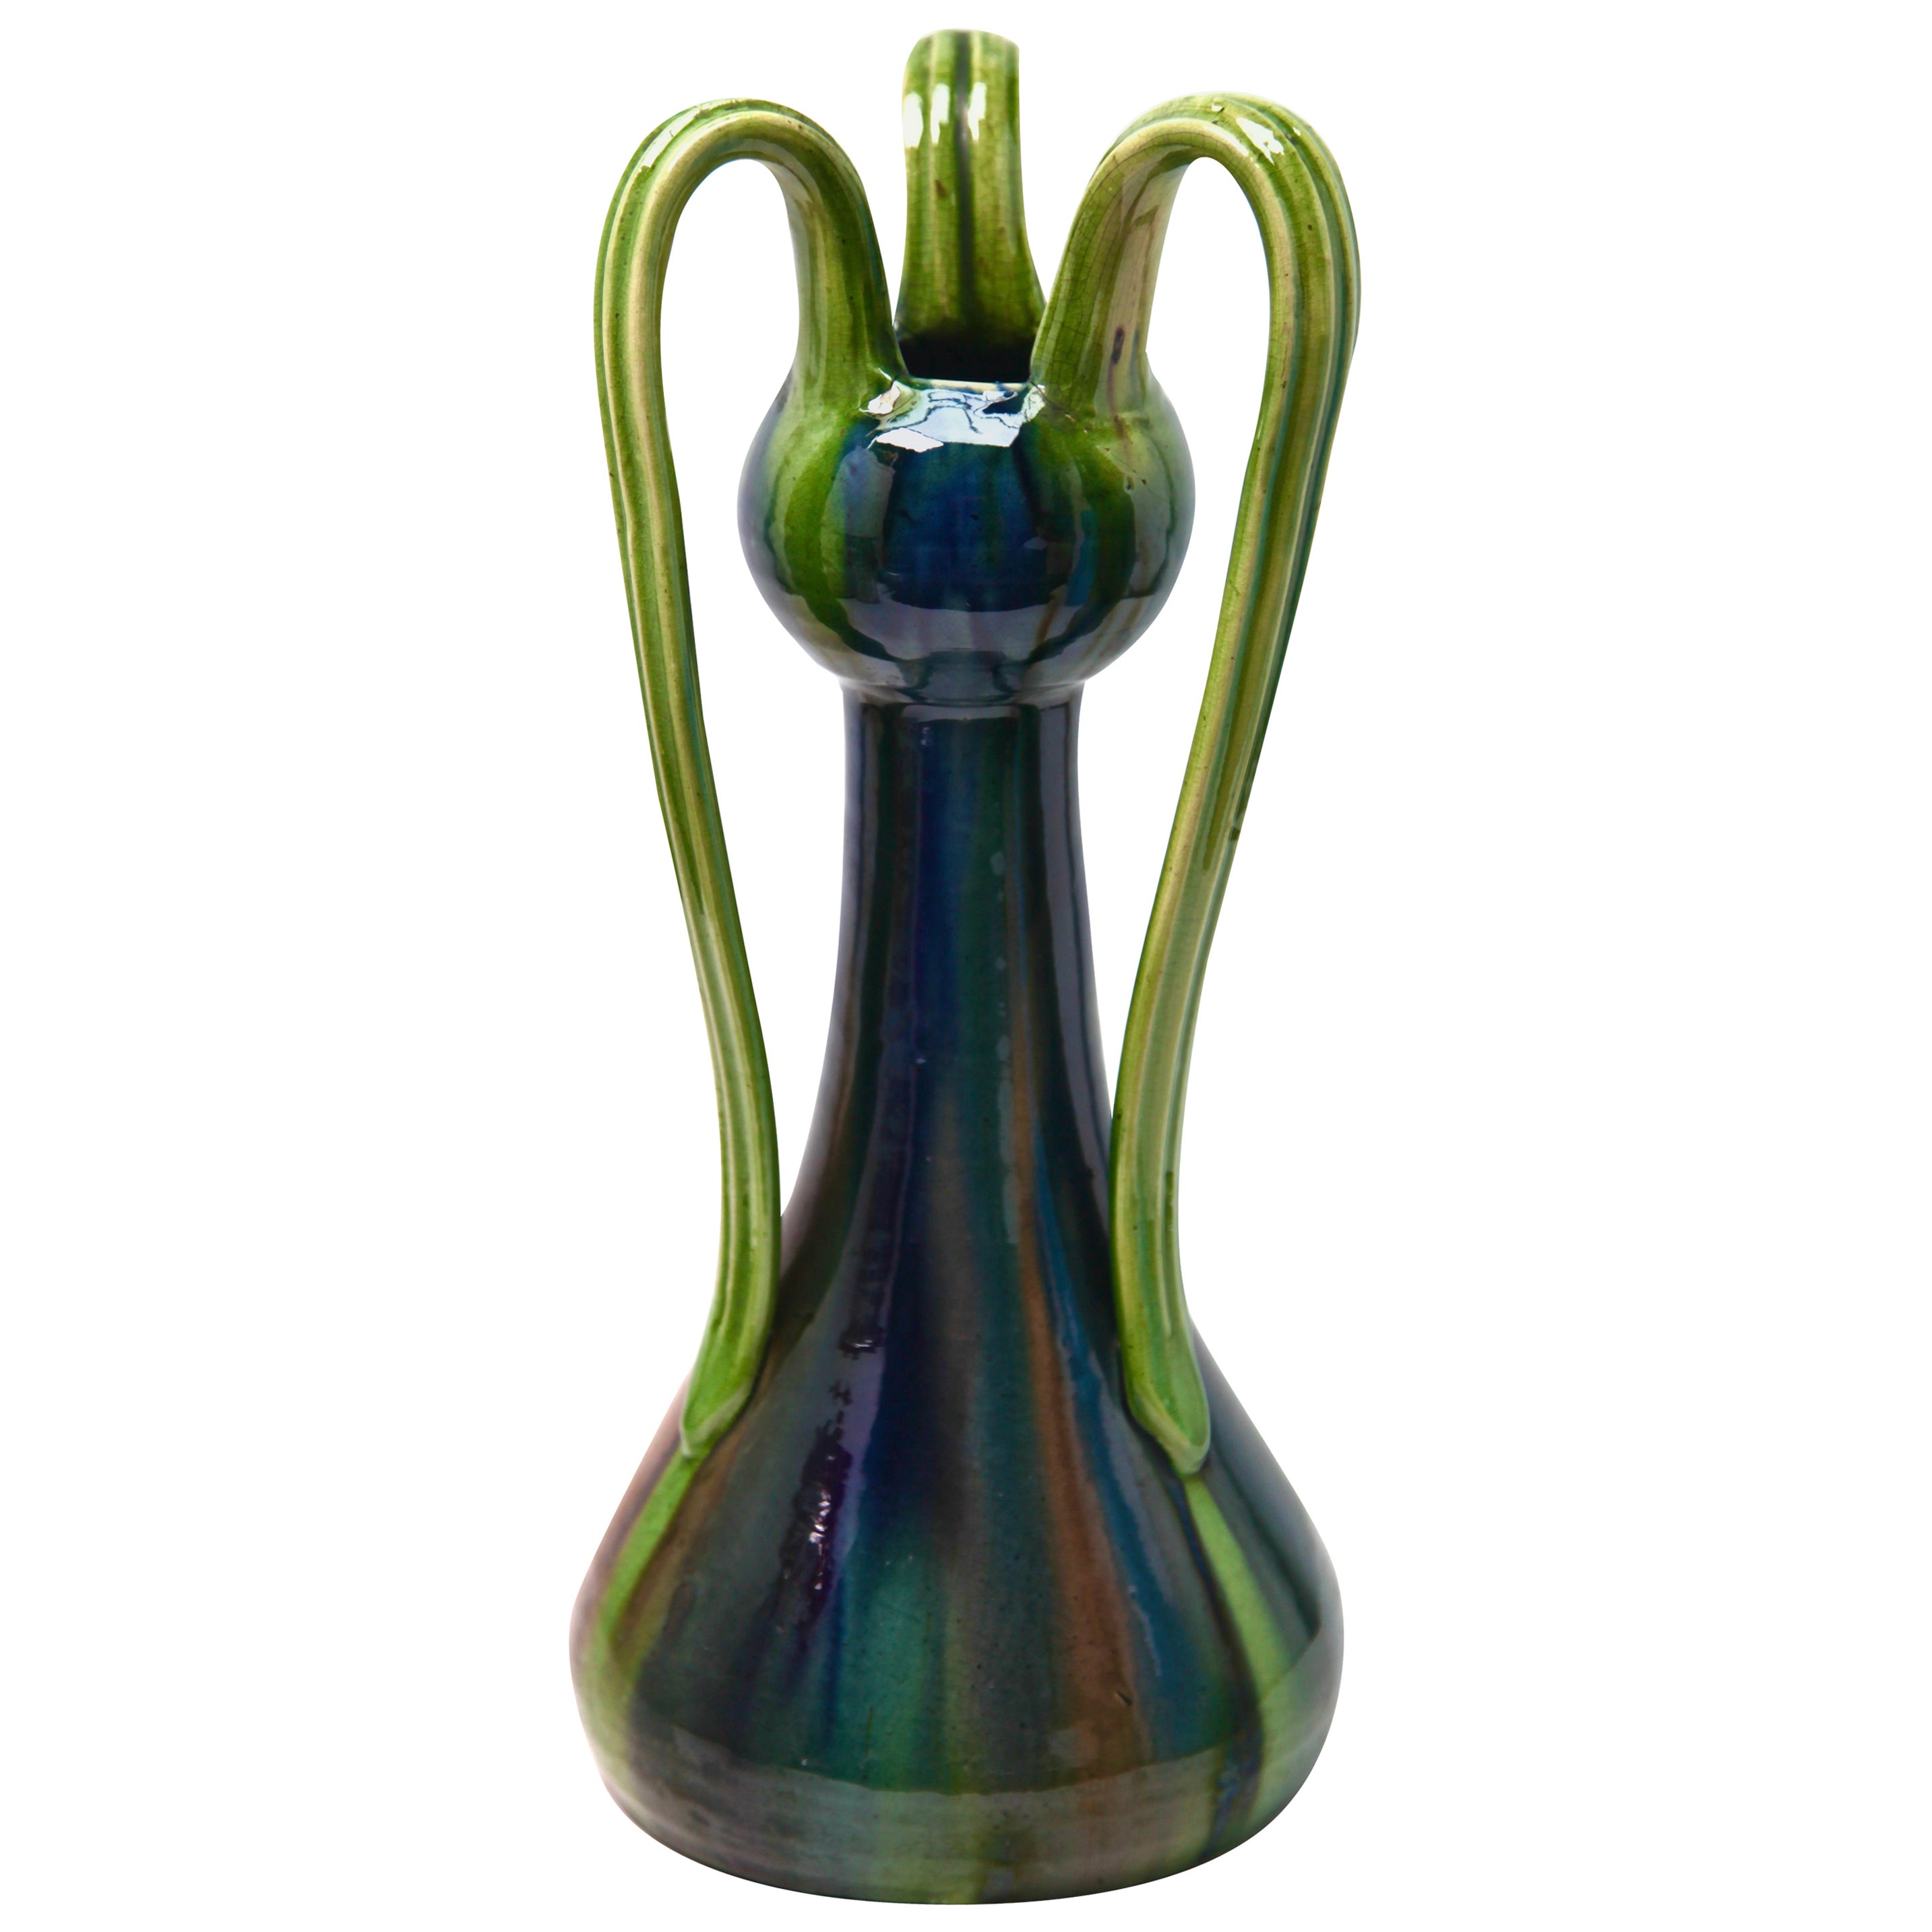 Art Nouveau Vase with 3 Handles with Controlled Drip Glazes in Blue and Green